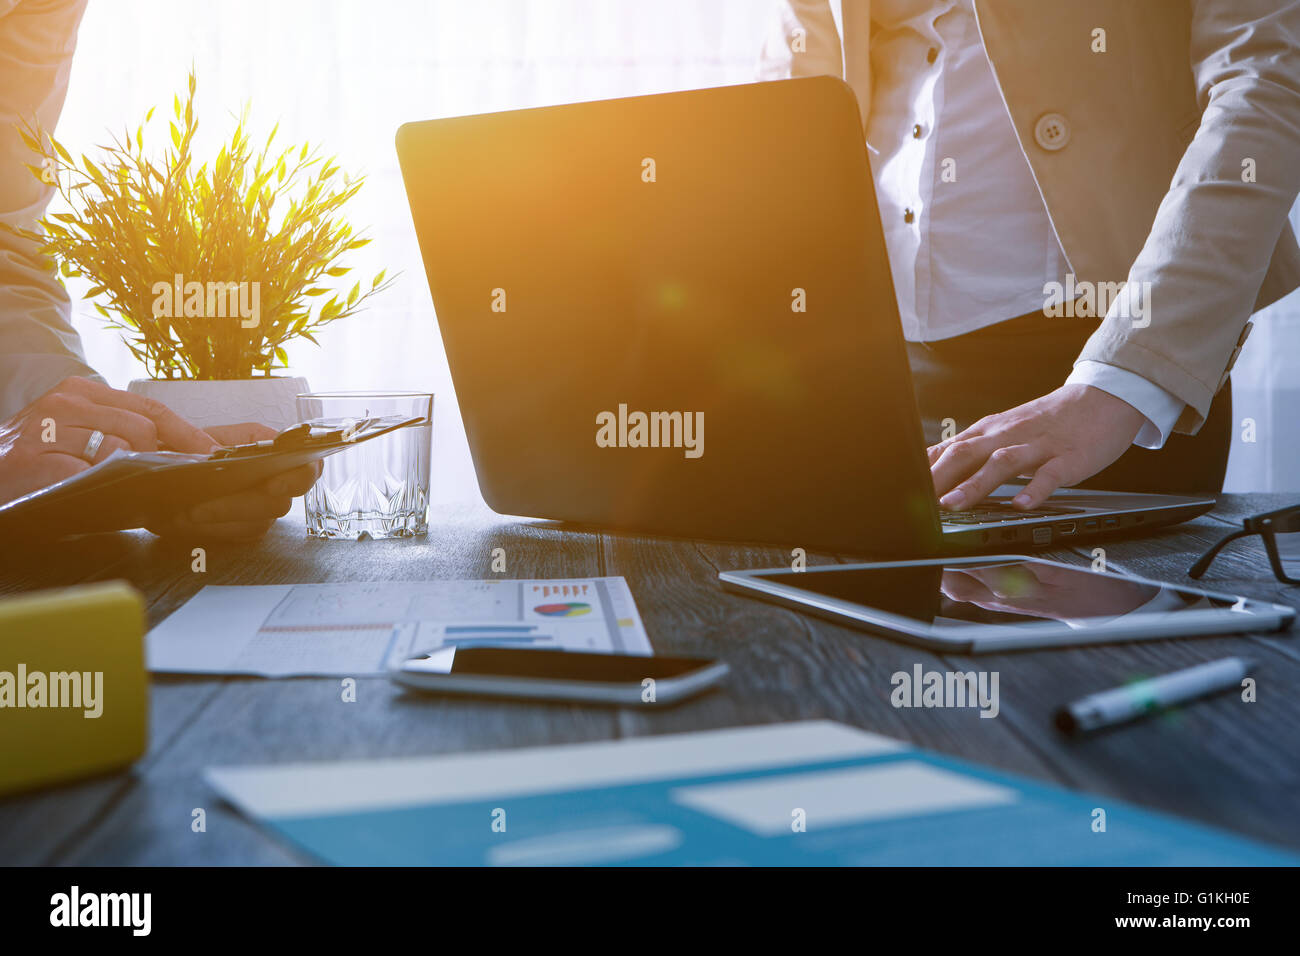 planning business career busy work laptop workplace - stock image Stock Photo